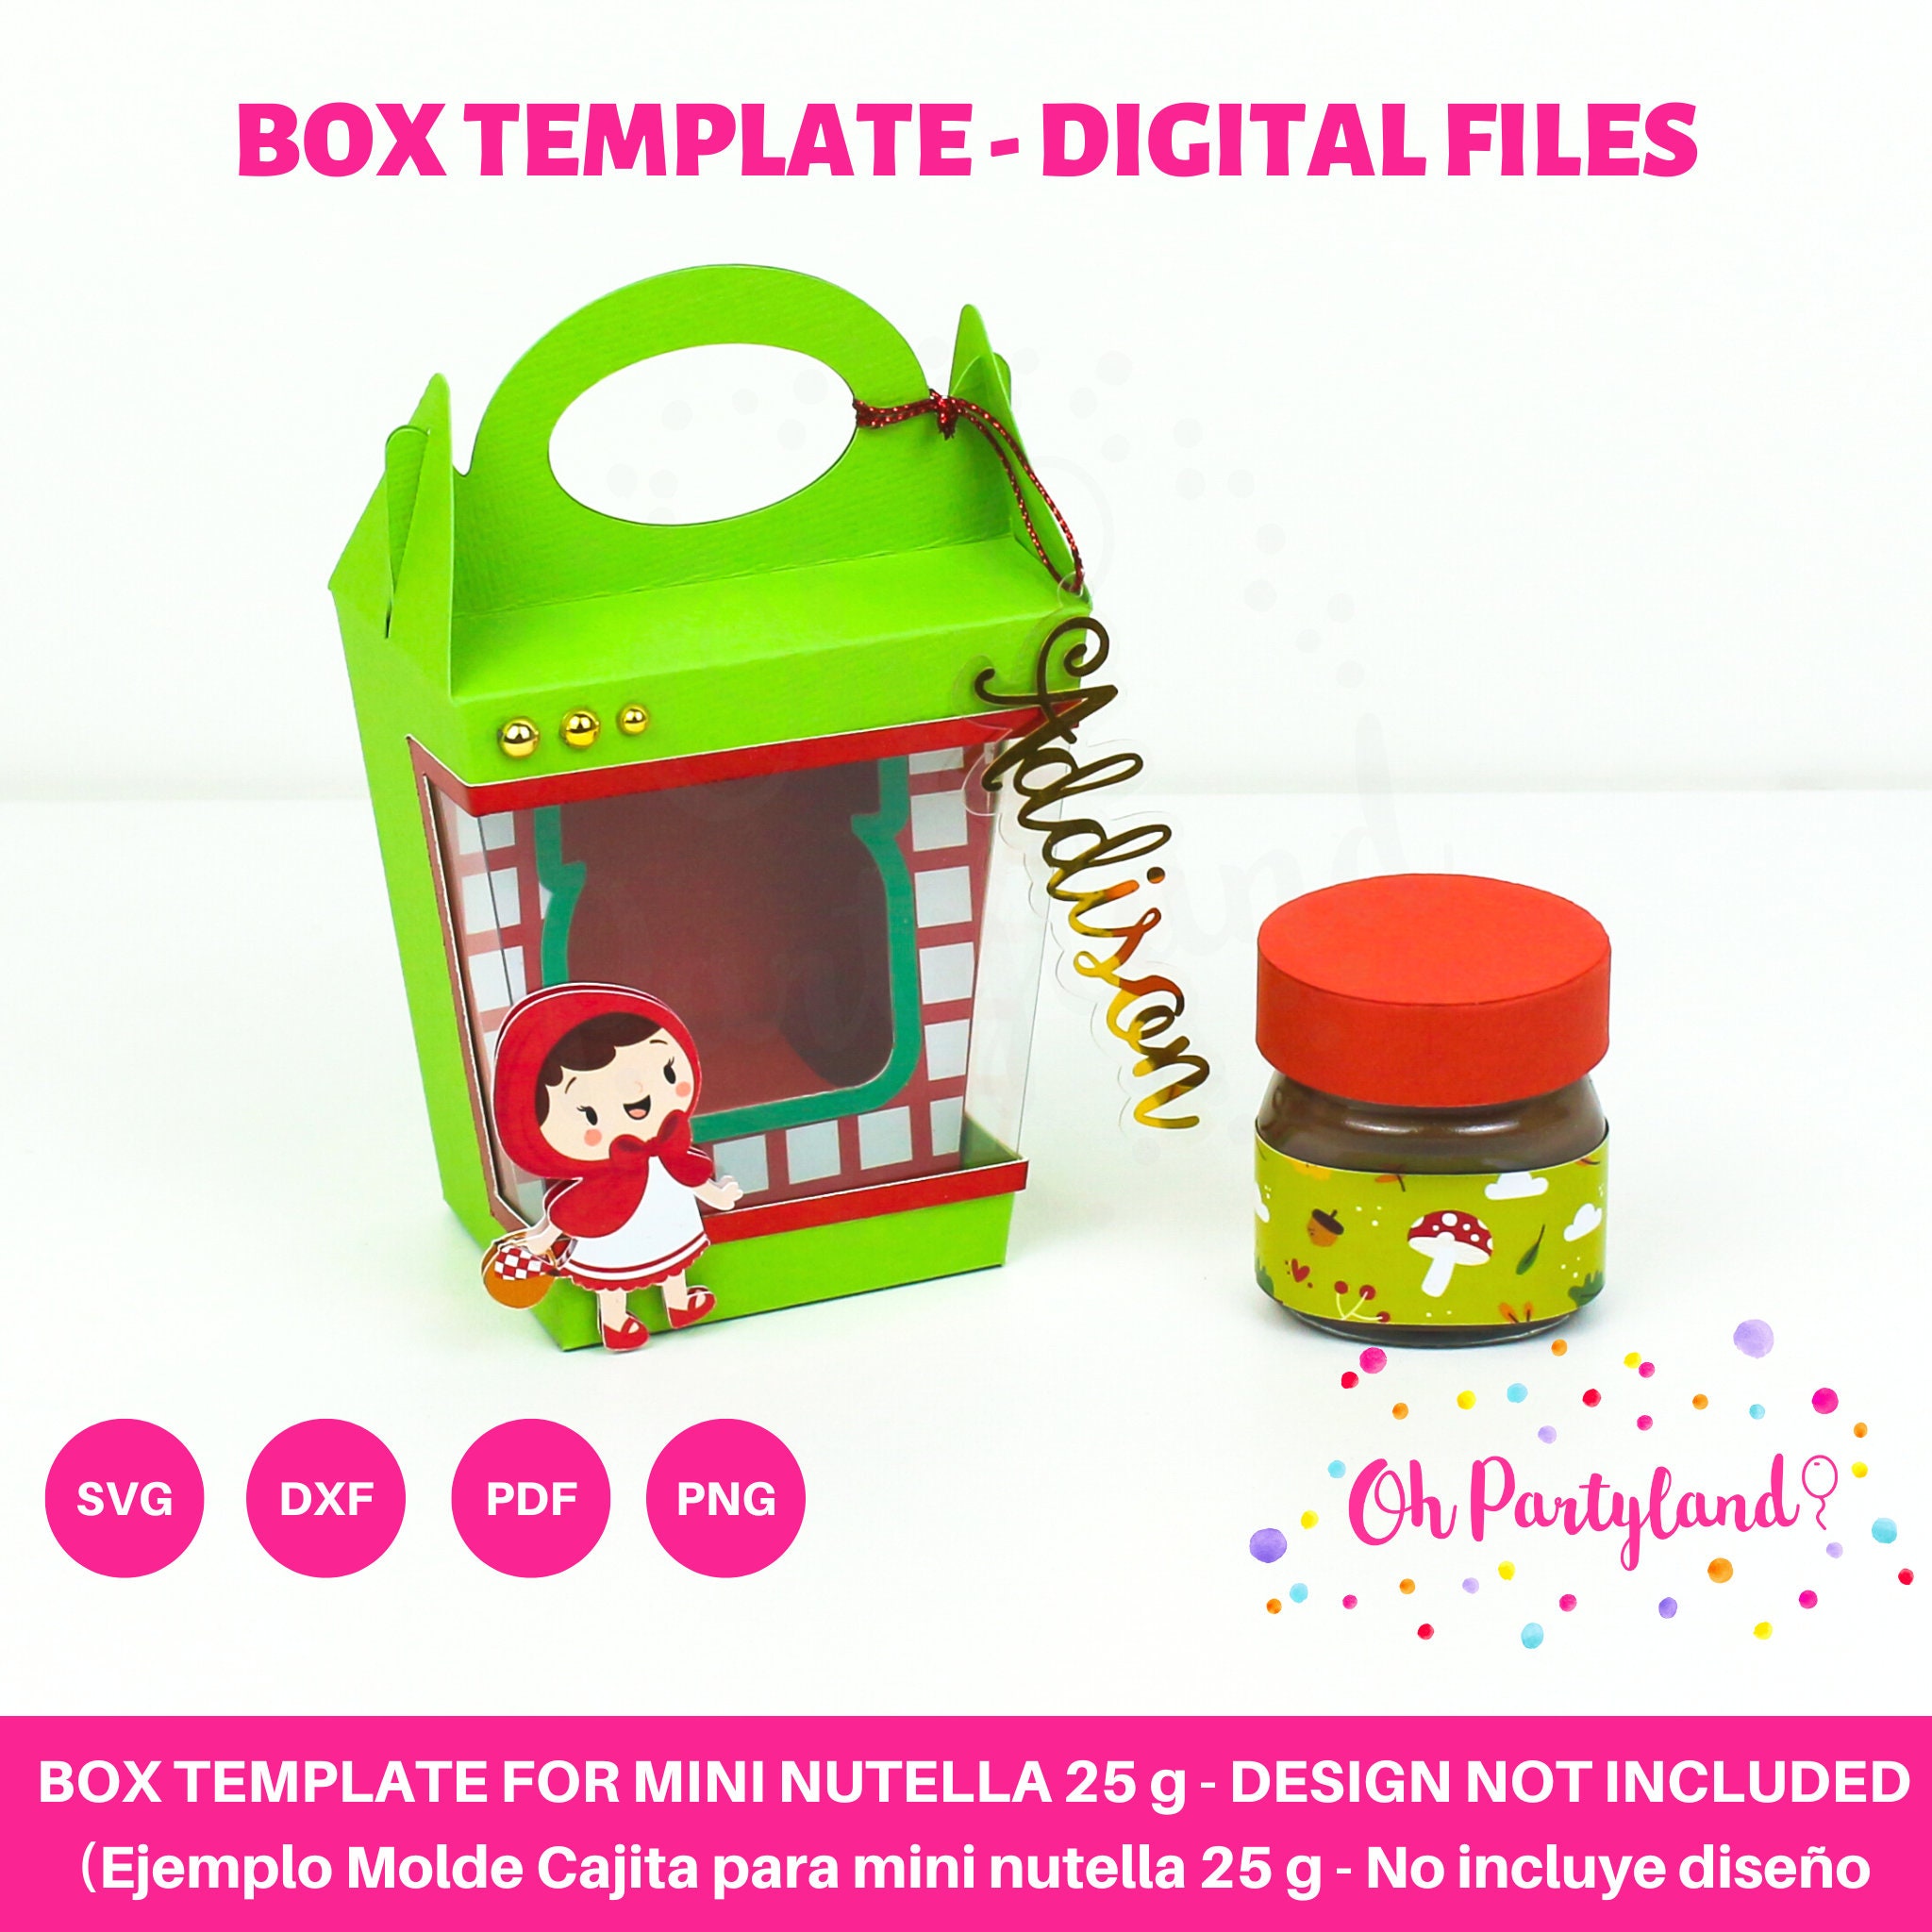 Mini Nutella Box Template with handle - Nutella 25g box template for Cricut  and Silhouette - oh partyland